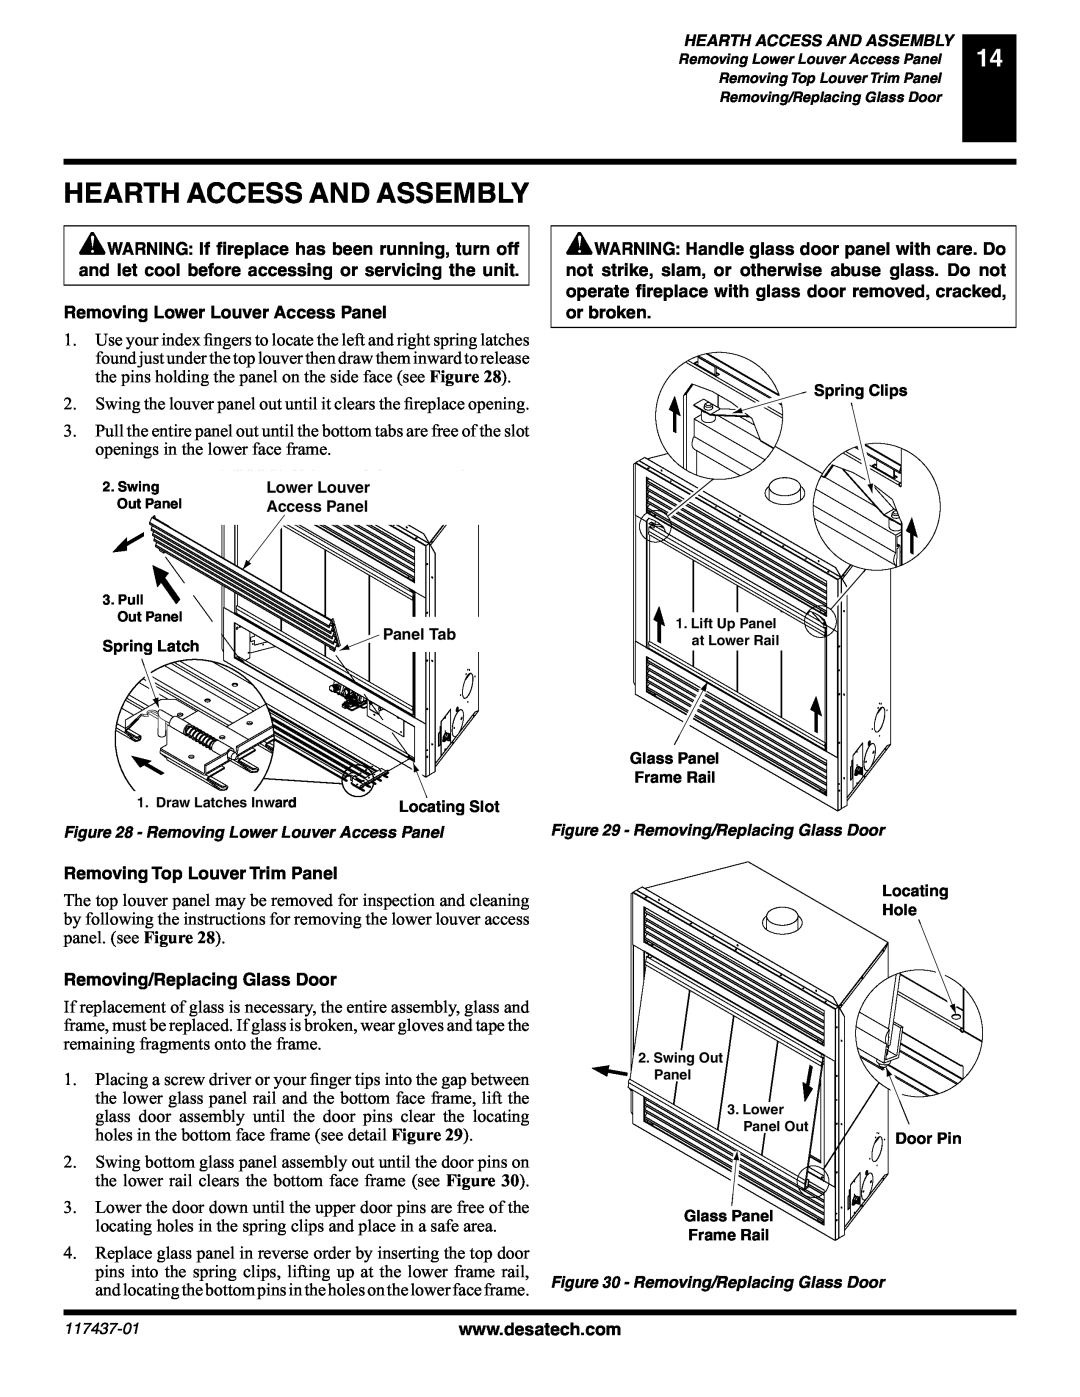 Desa (V) CB36(N Hearth Access And Assembly, Removing Lower Louver Access Panel, Removing Top Louver Trim Panel 